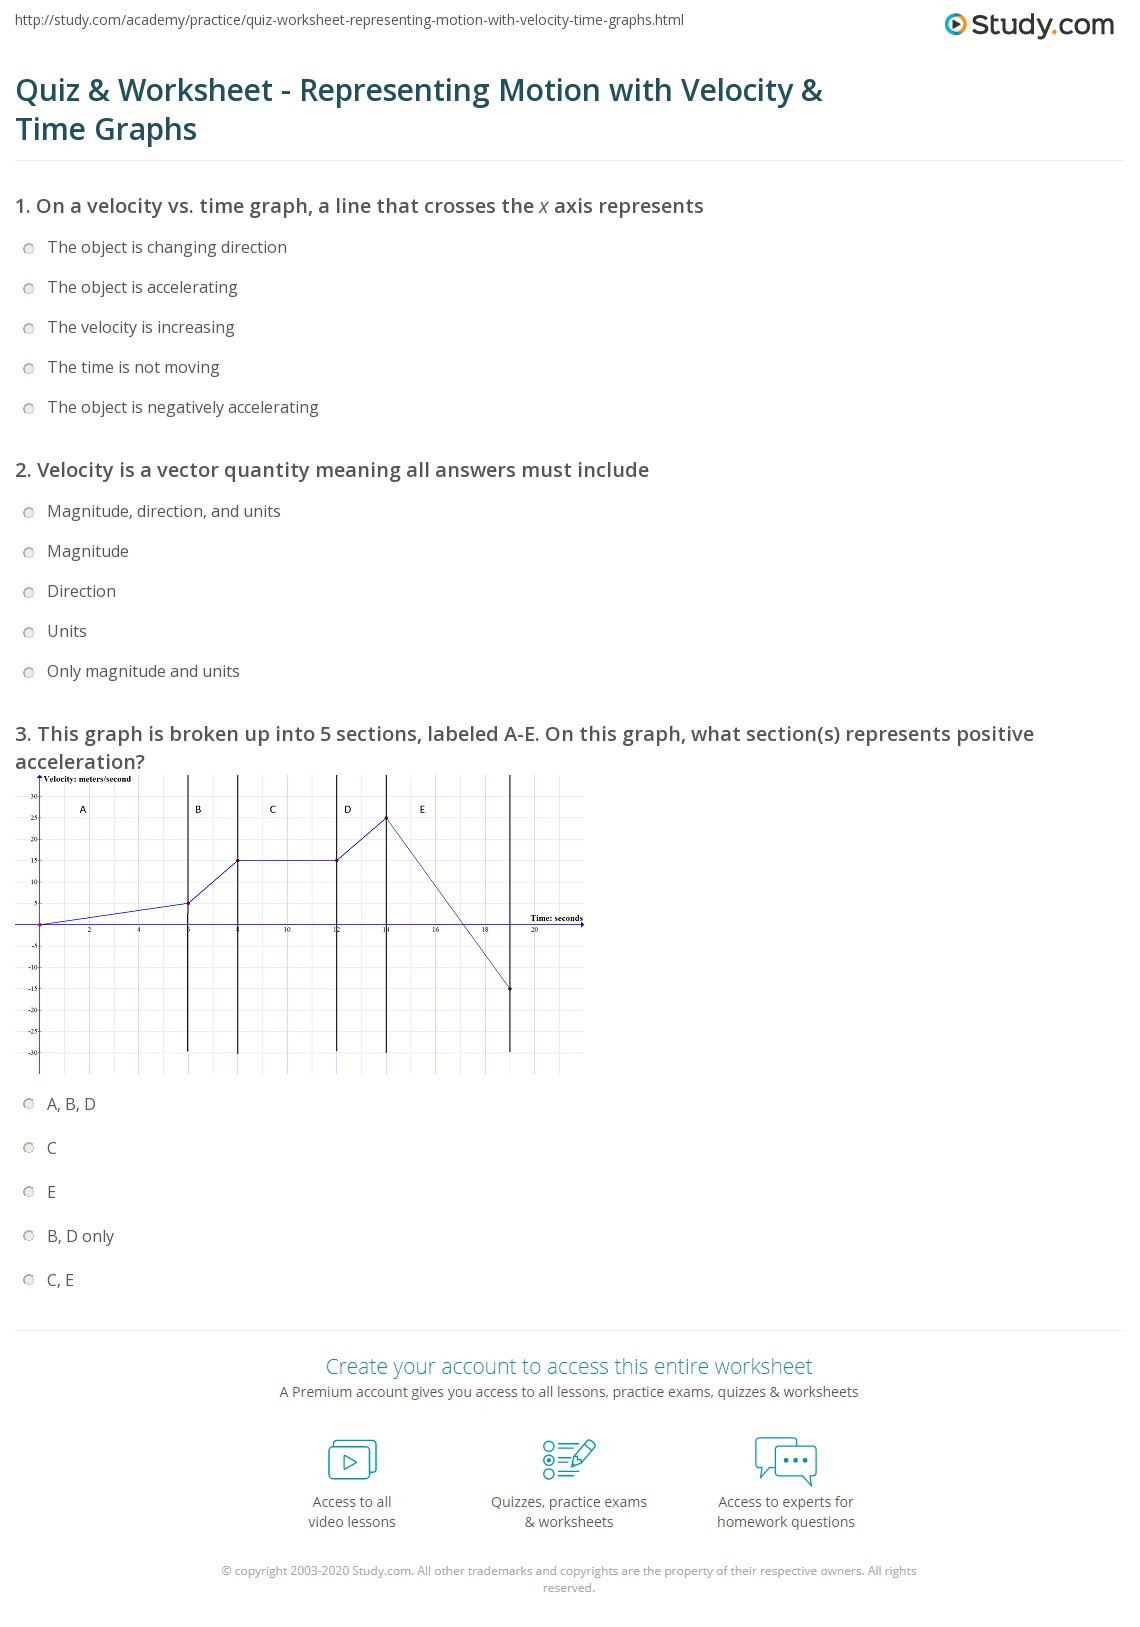 Velocity Time Graph Worksheet Quiz &amp; Worksheet Representing Motion with Velocity &amp; Time